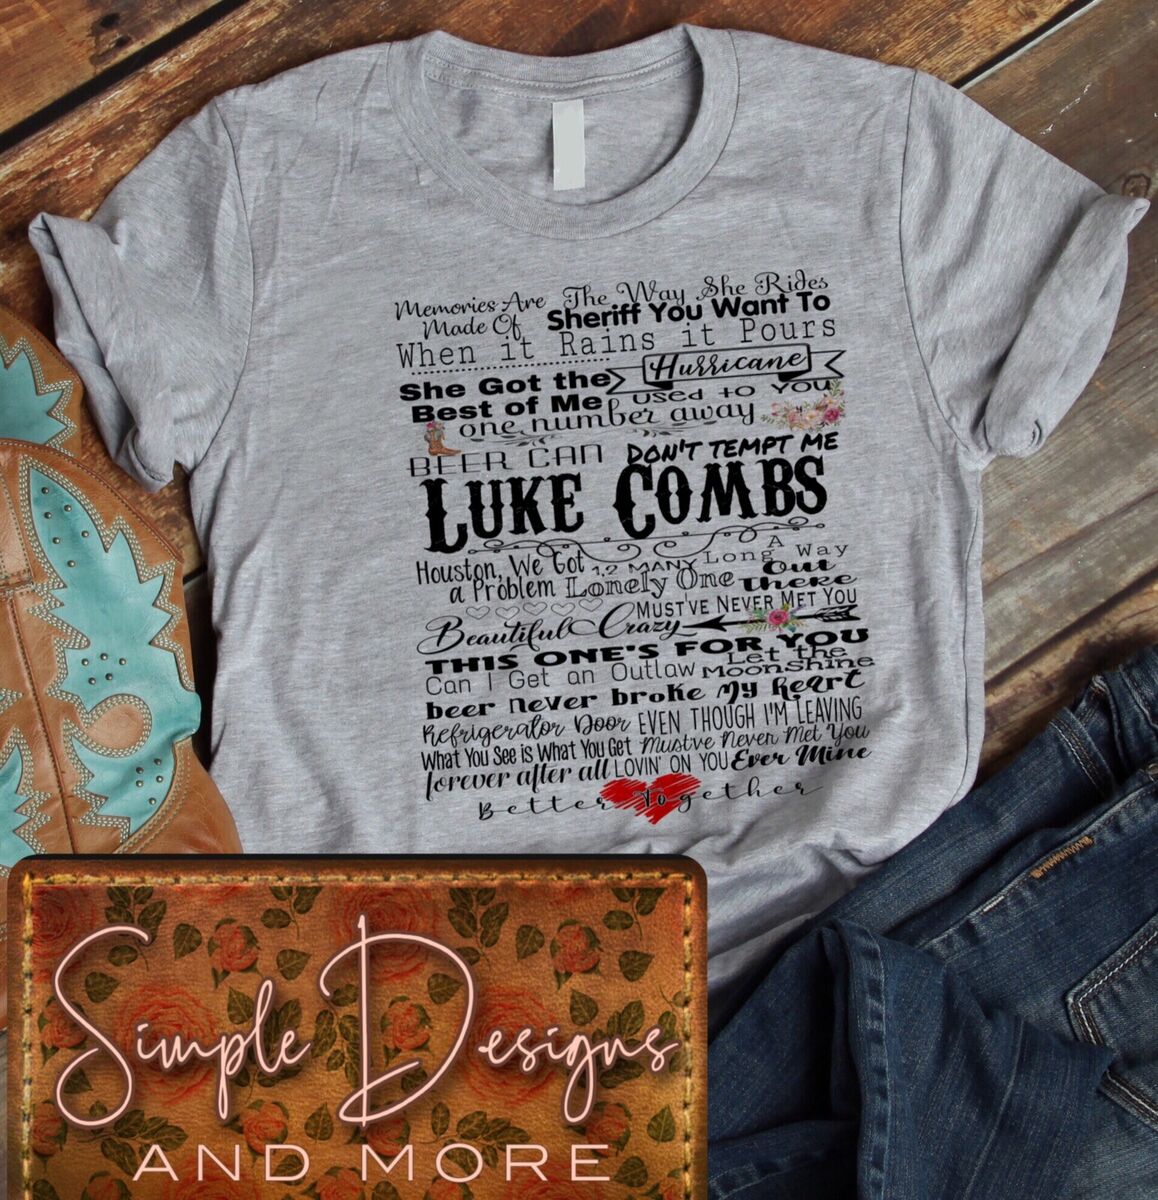 Can I Find Luke Combs Shirts In Stores?